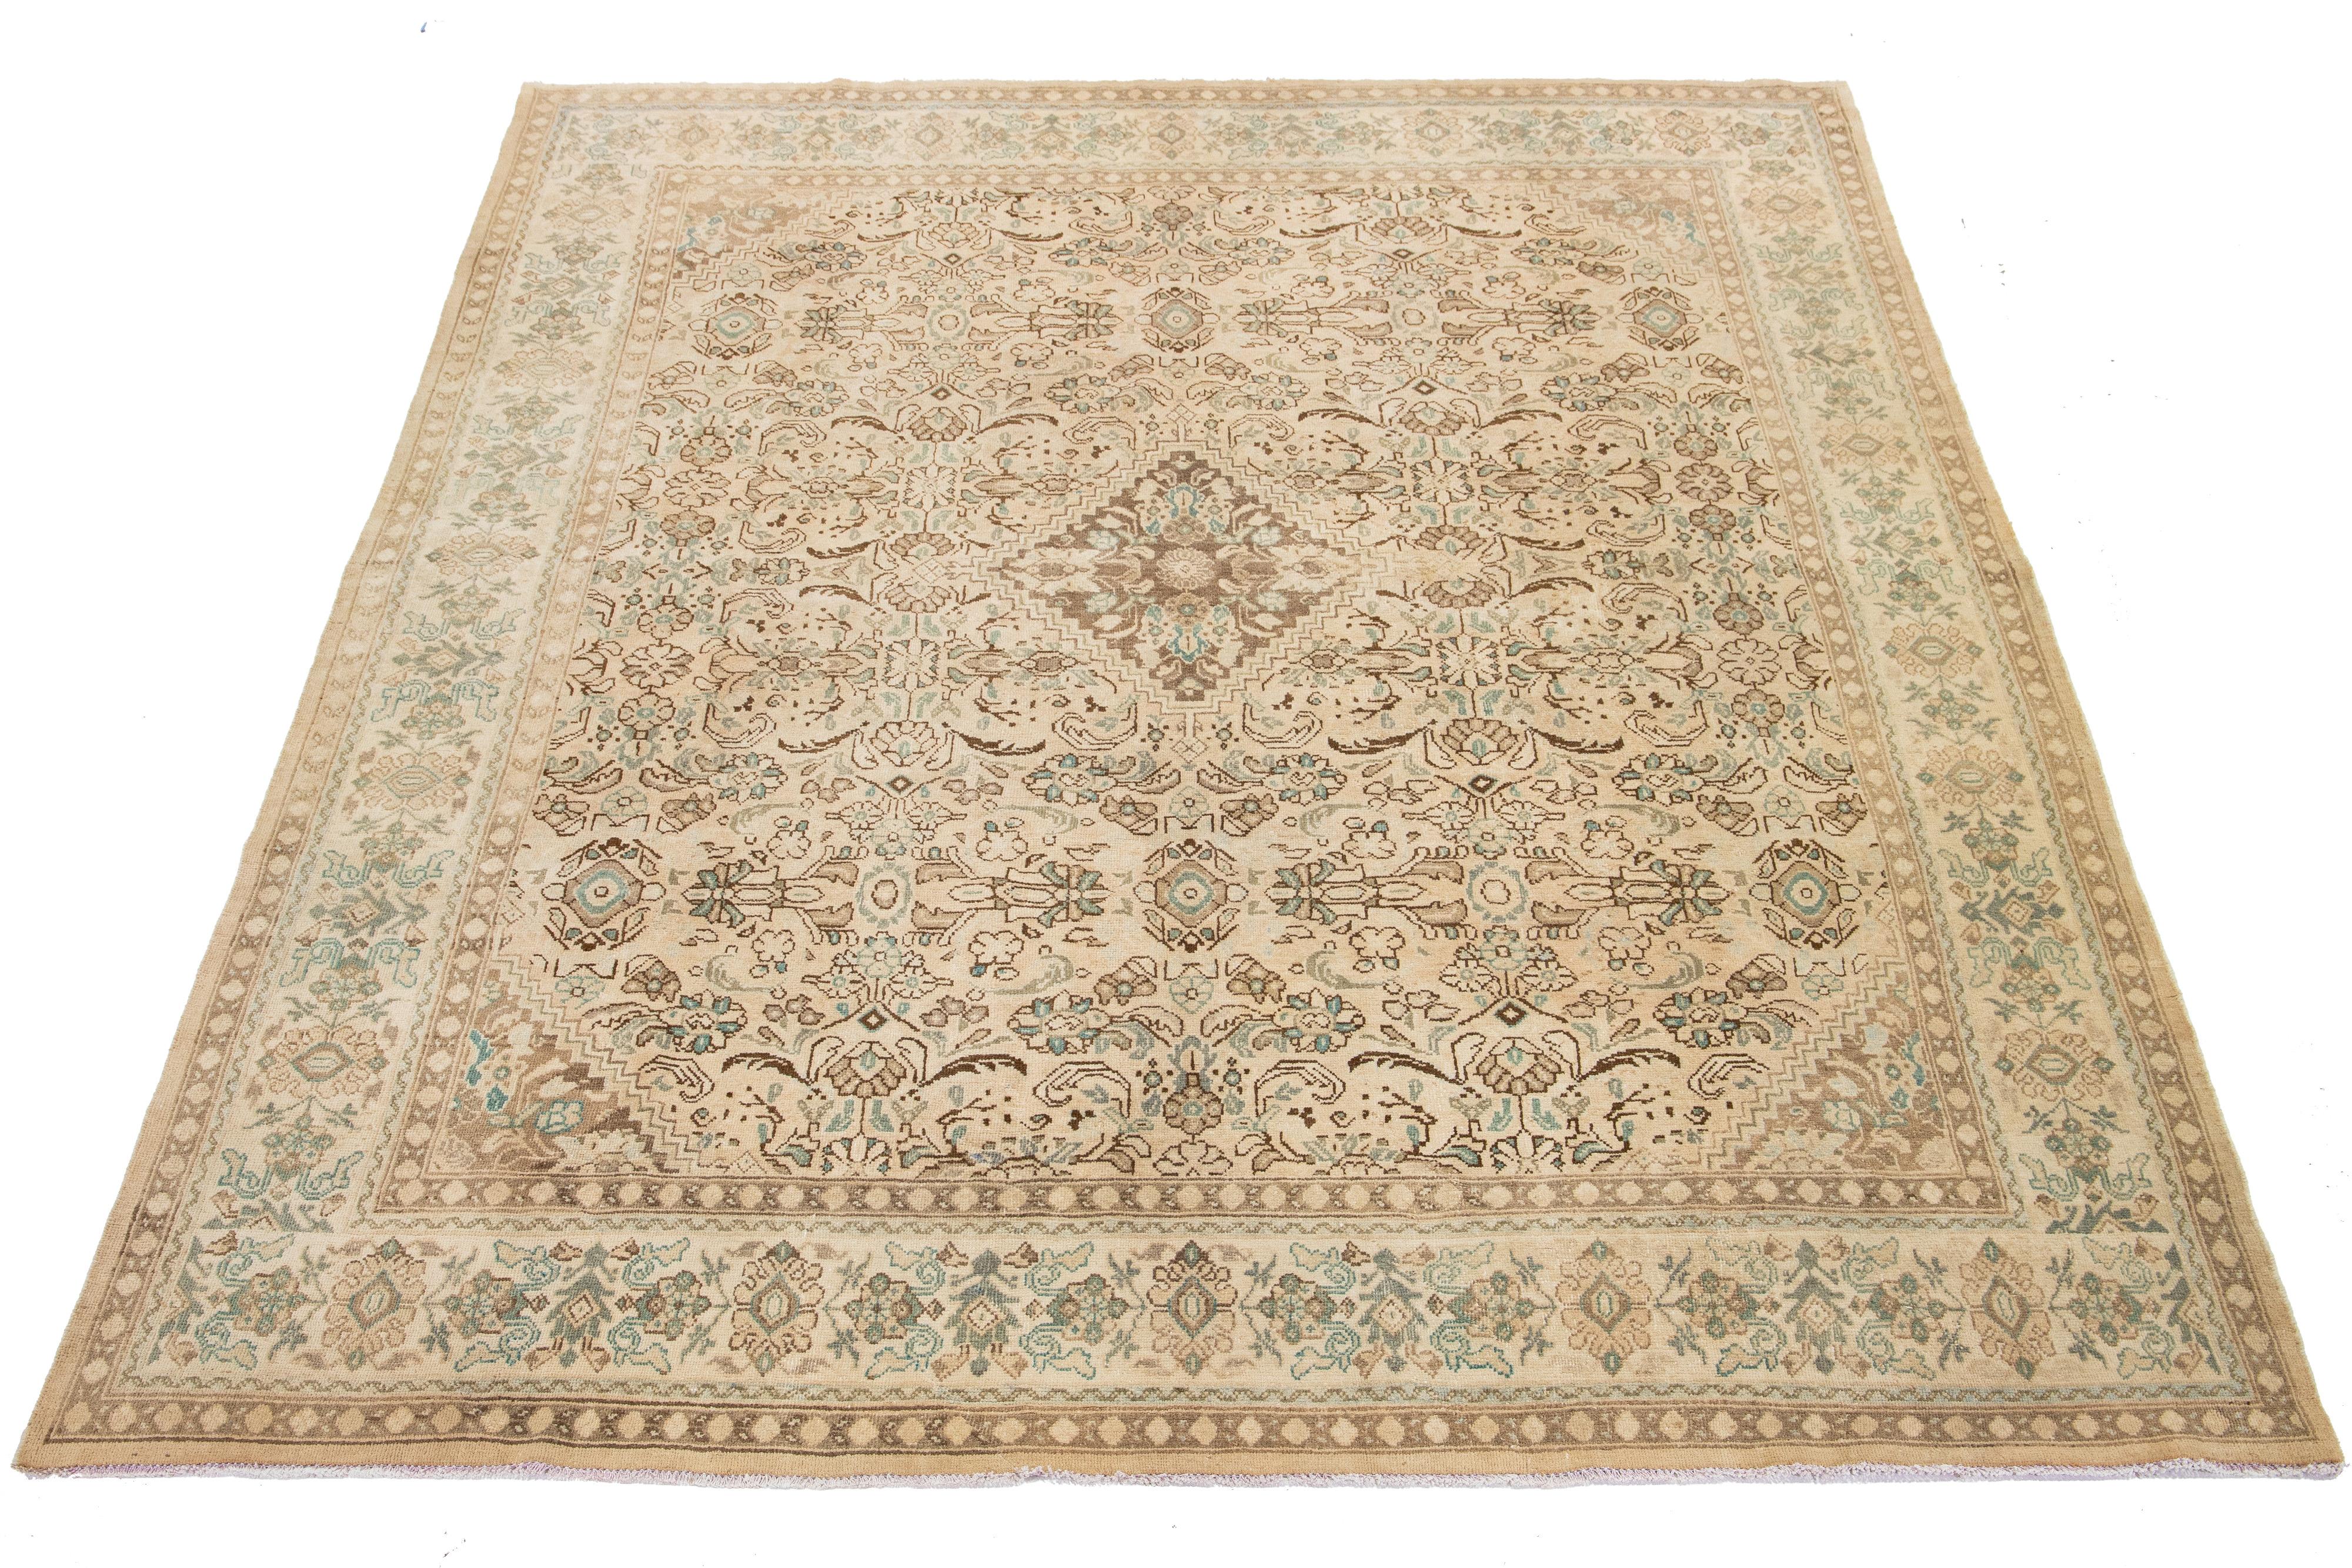 This antique Persian Mahal wool rug has a beige background and blue and brown floral designs.

This rug measures 9'5